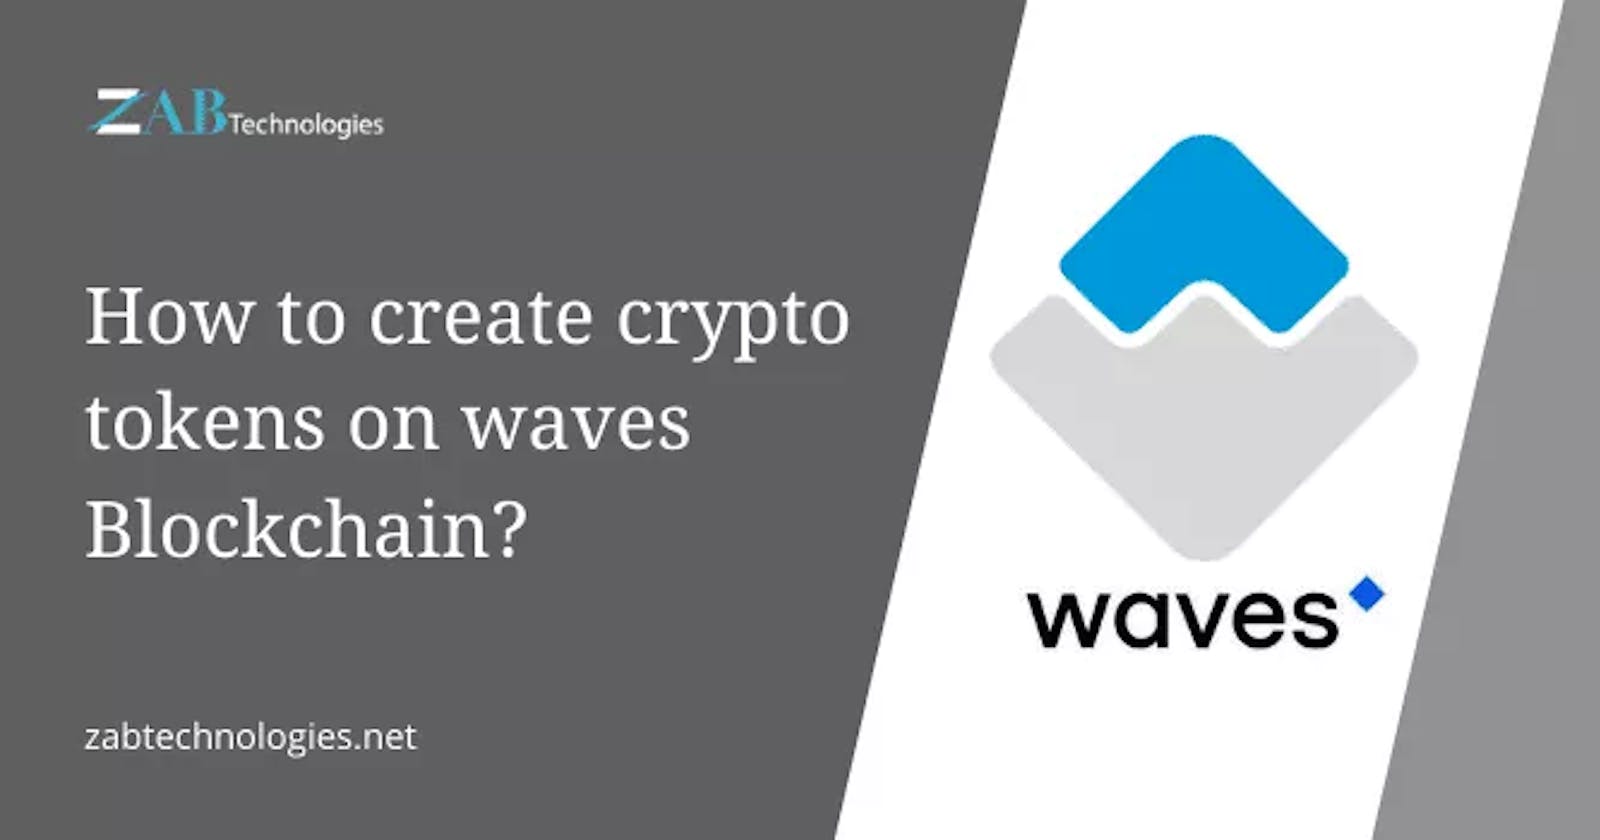 Create Waves Token - 10 Reasons To Consider